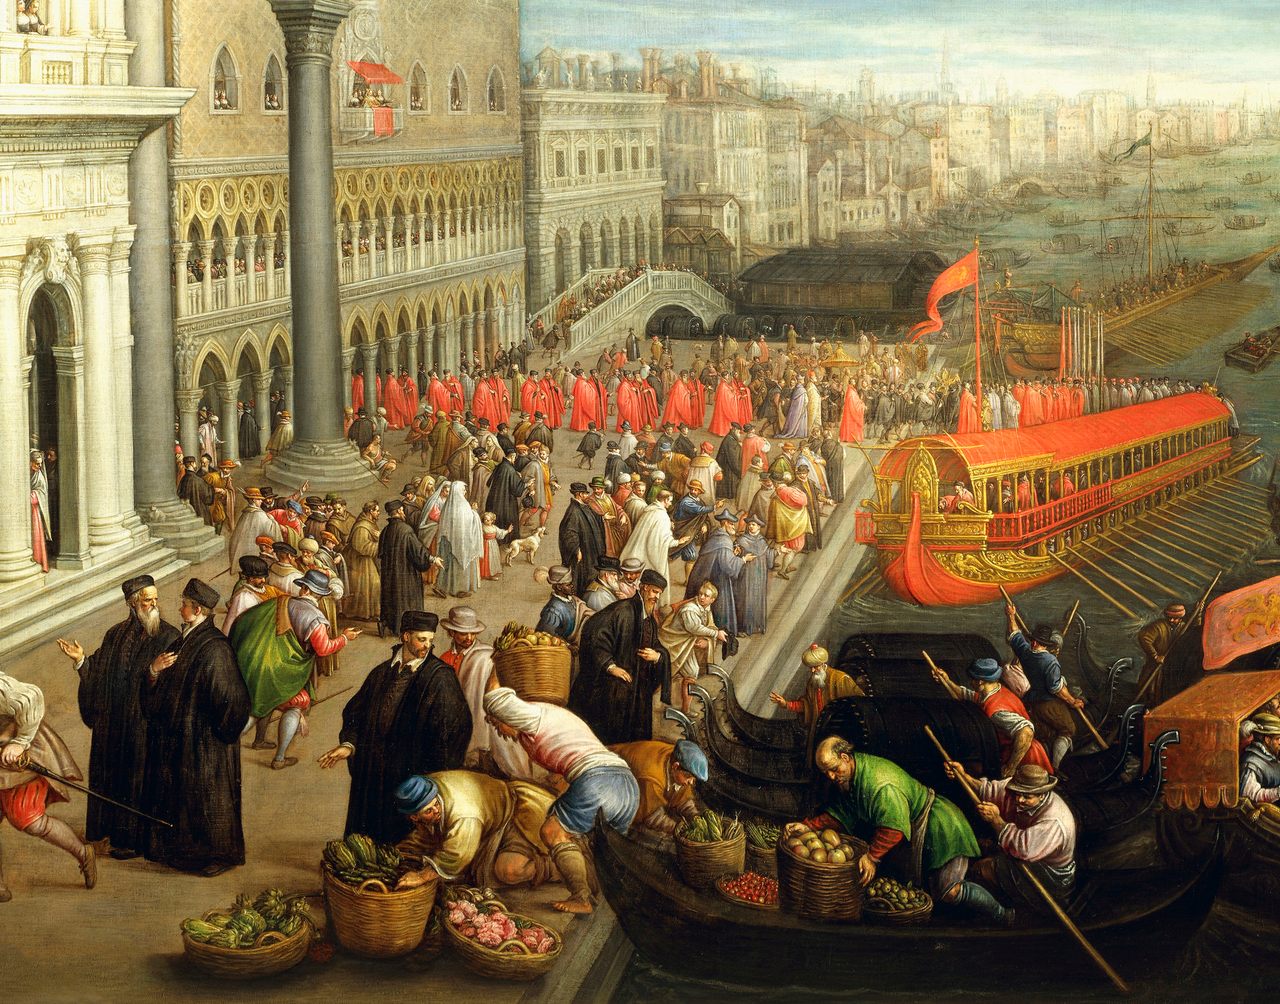 The banks of the Schiavoni in Venice, painted by artist Leandro Bassano (1557-1622).